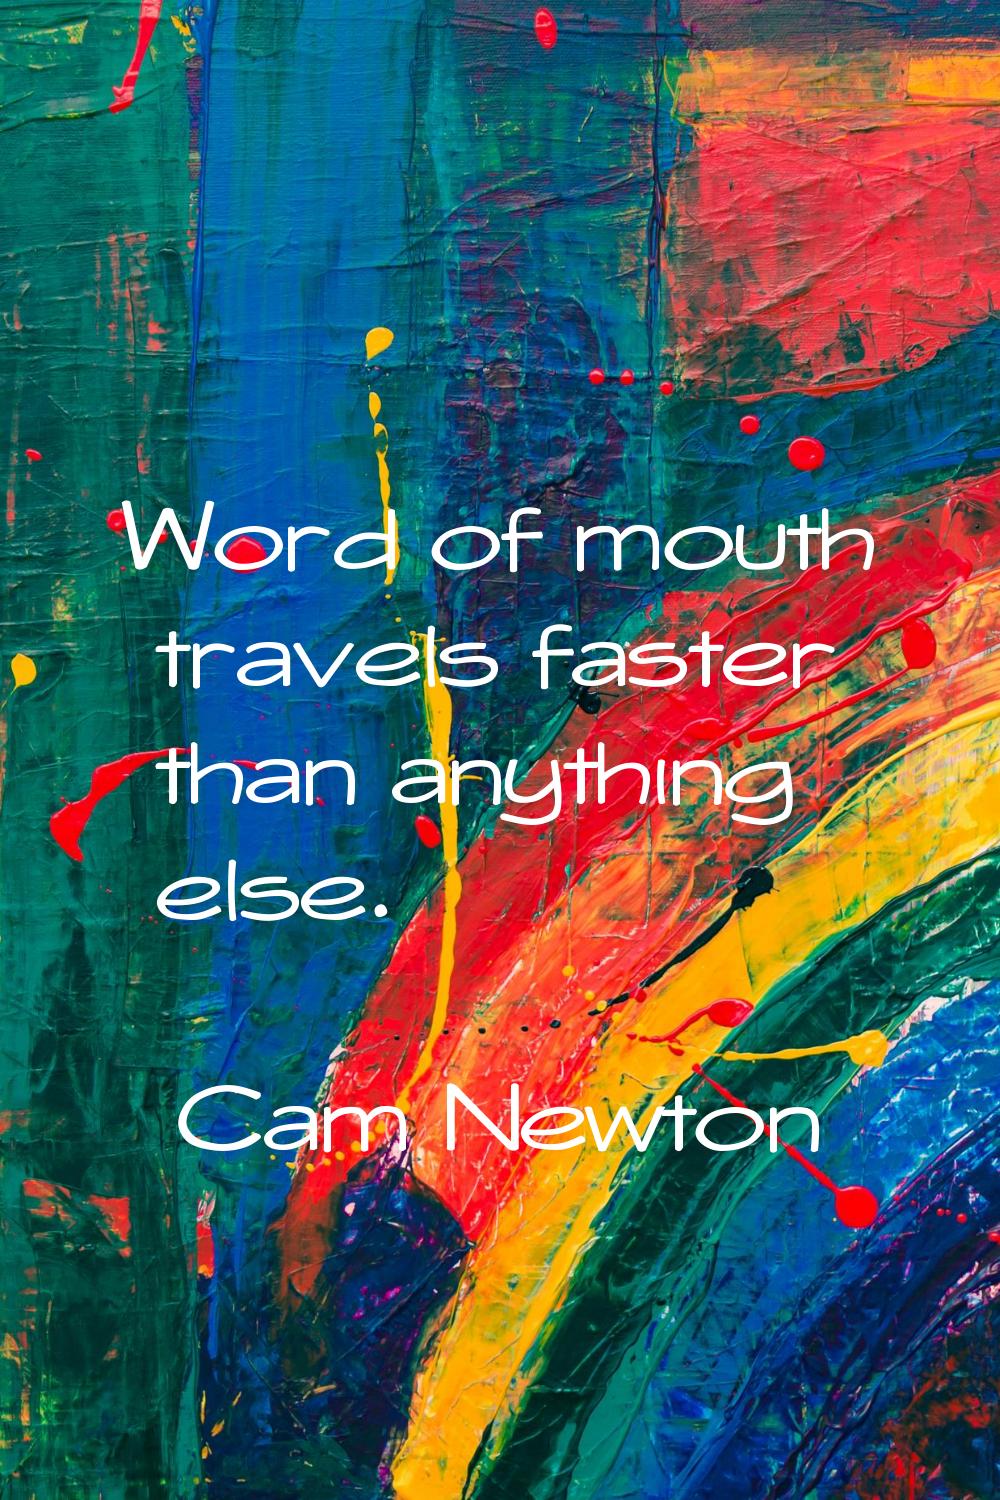 Word of mouth travels faster than anything else.